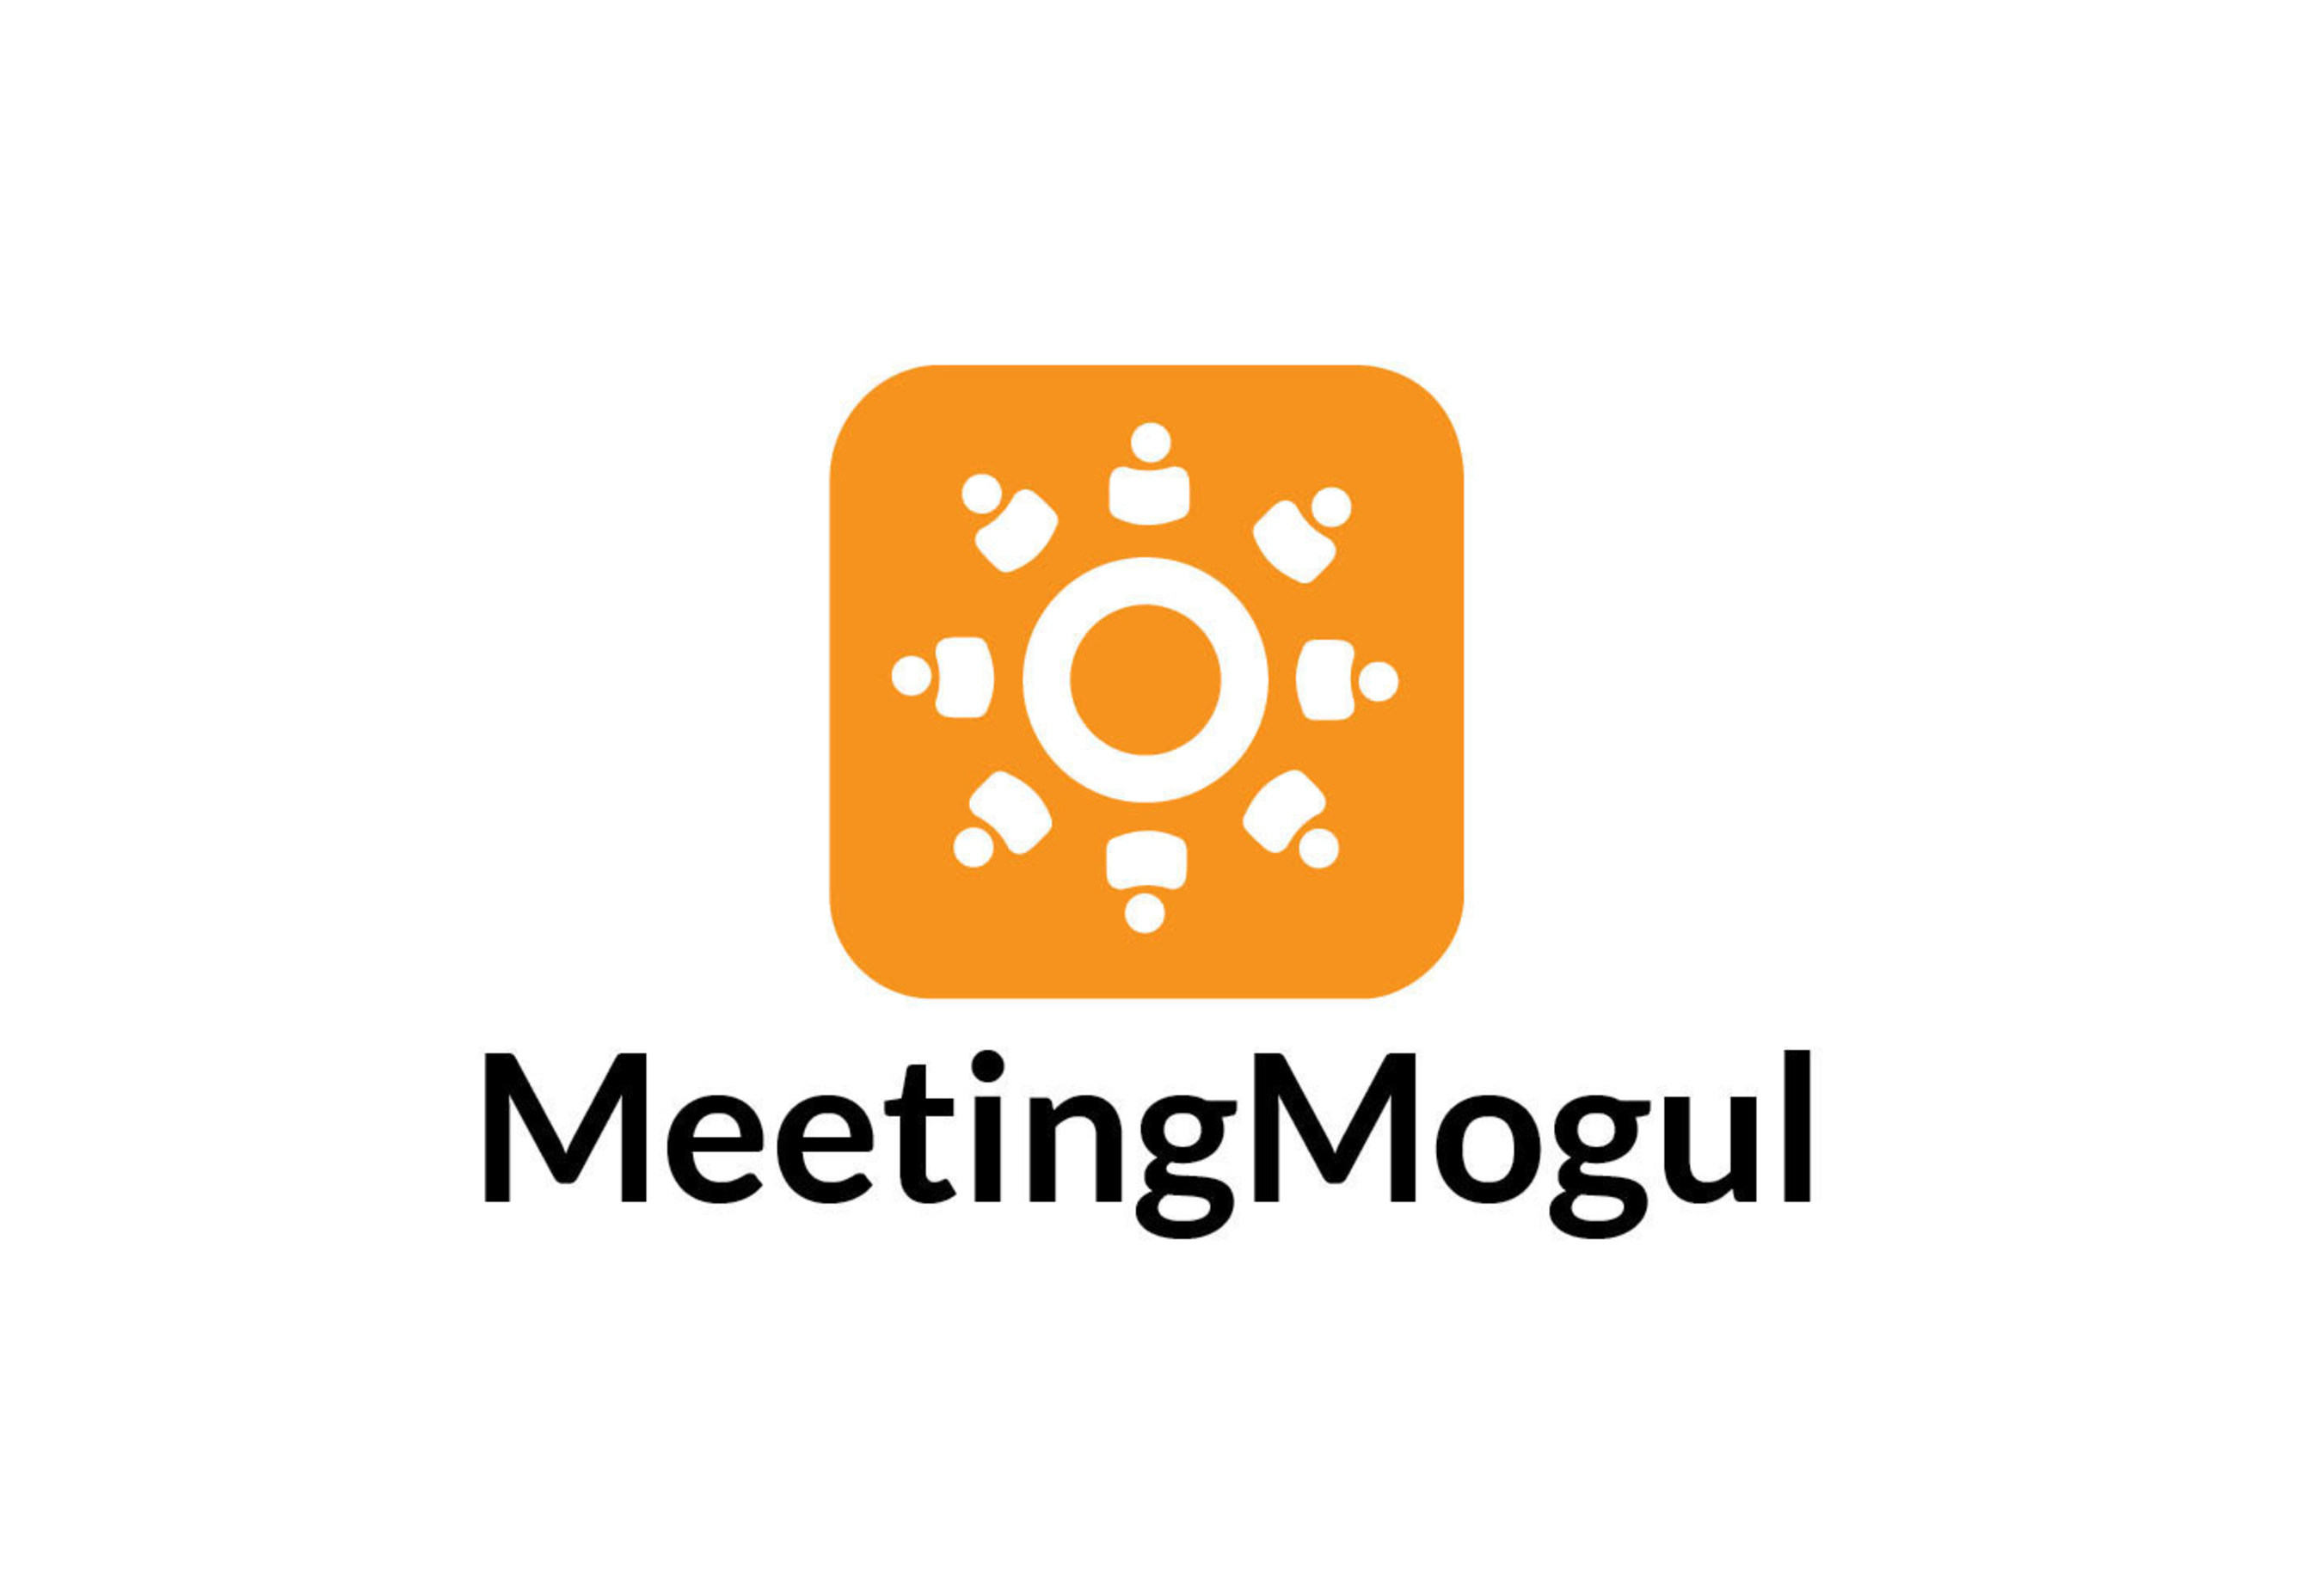 MeetingMogul is a one-touch conference call connection application that works with all major conference service providers for individuals and small business users who want a seamless service to join various conference bridges from their smartphones from anywhere in the world.